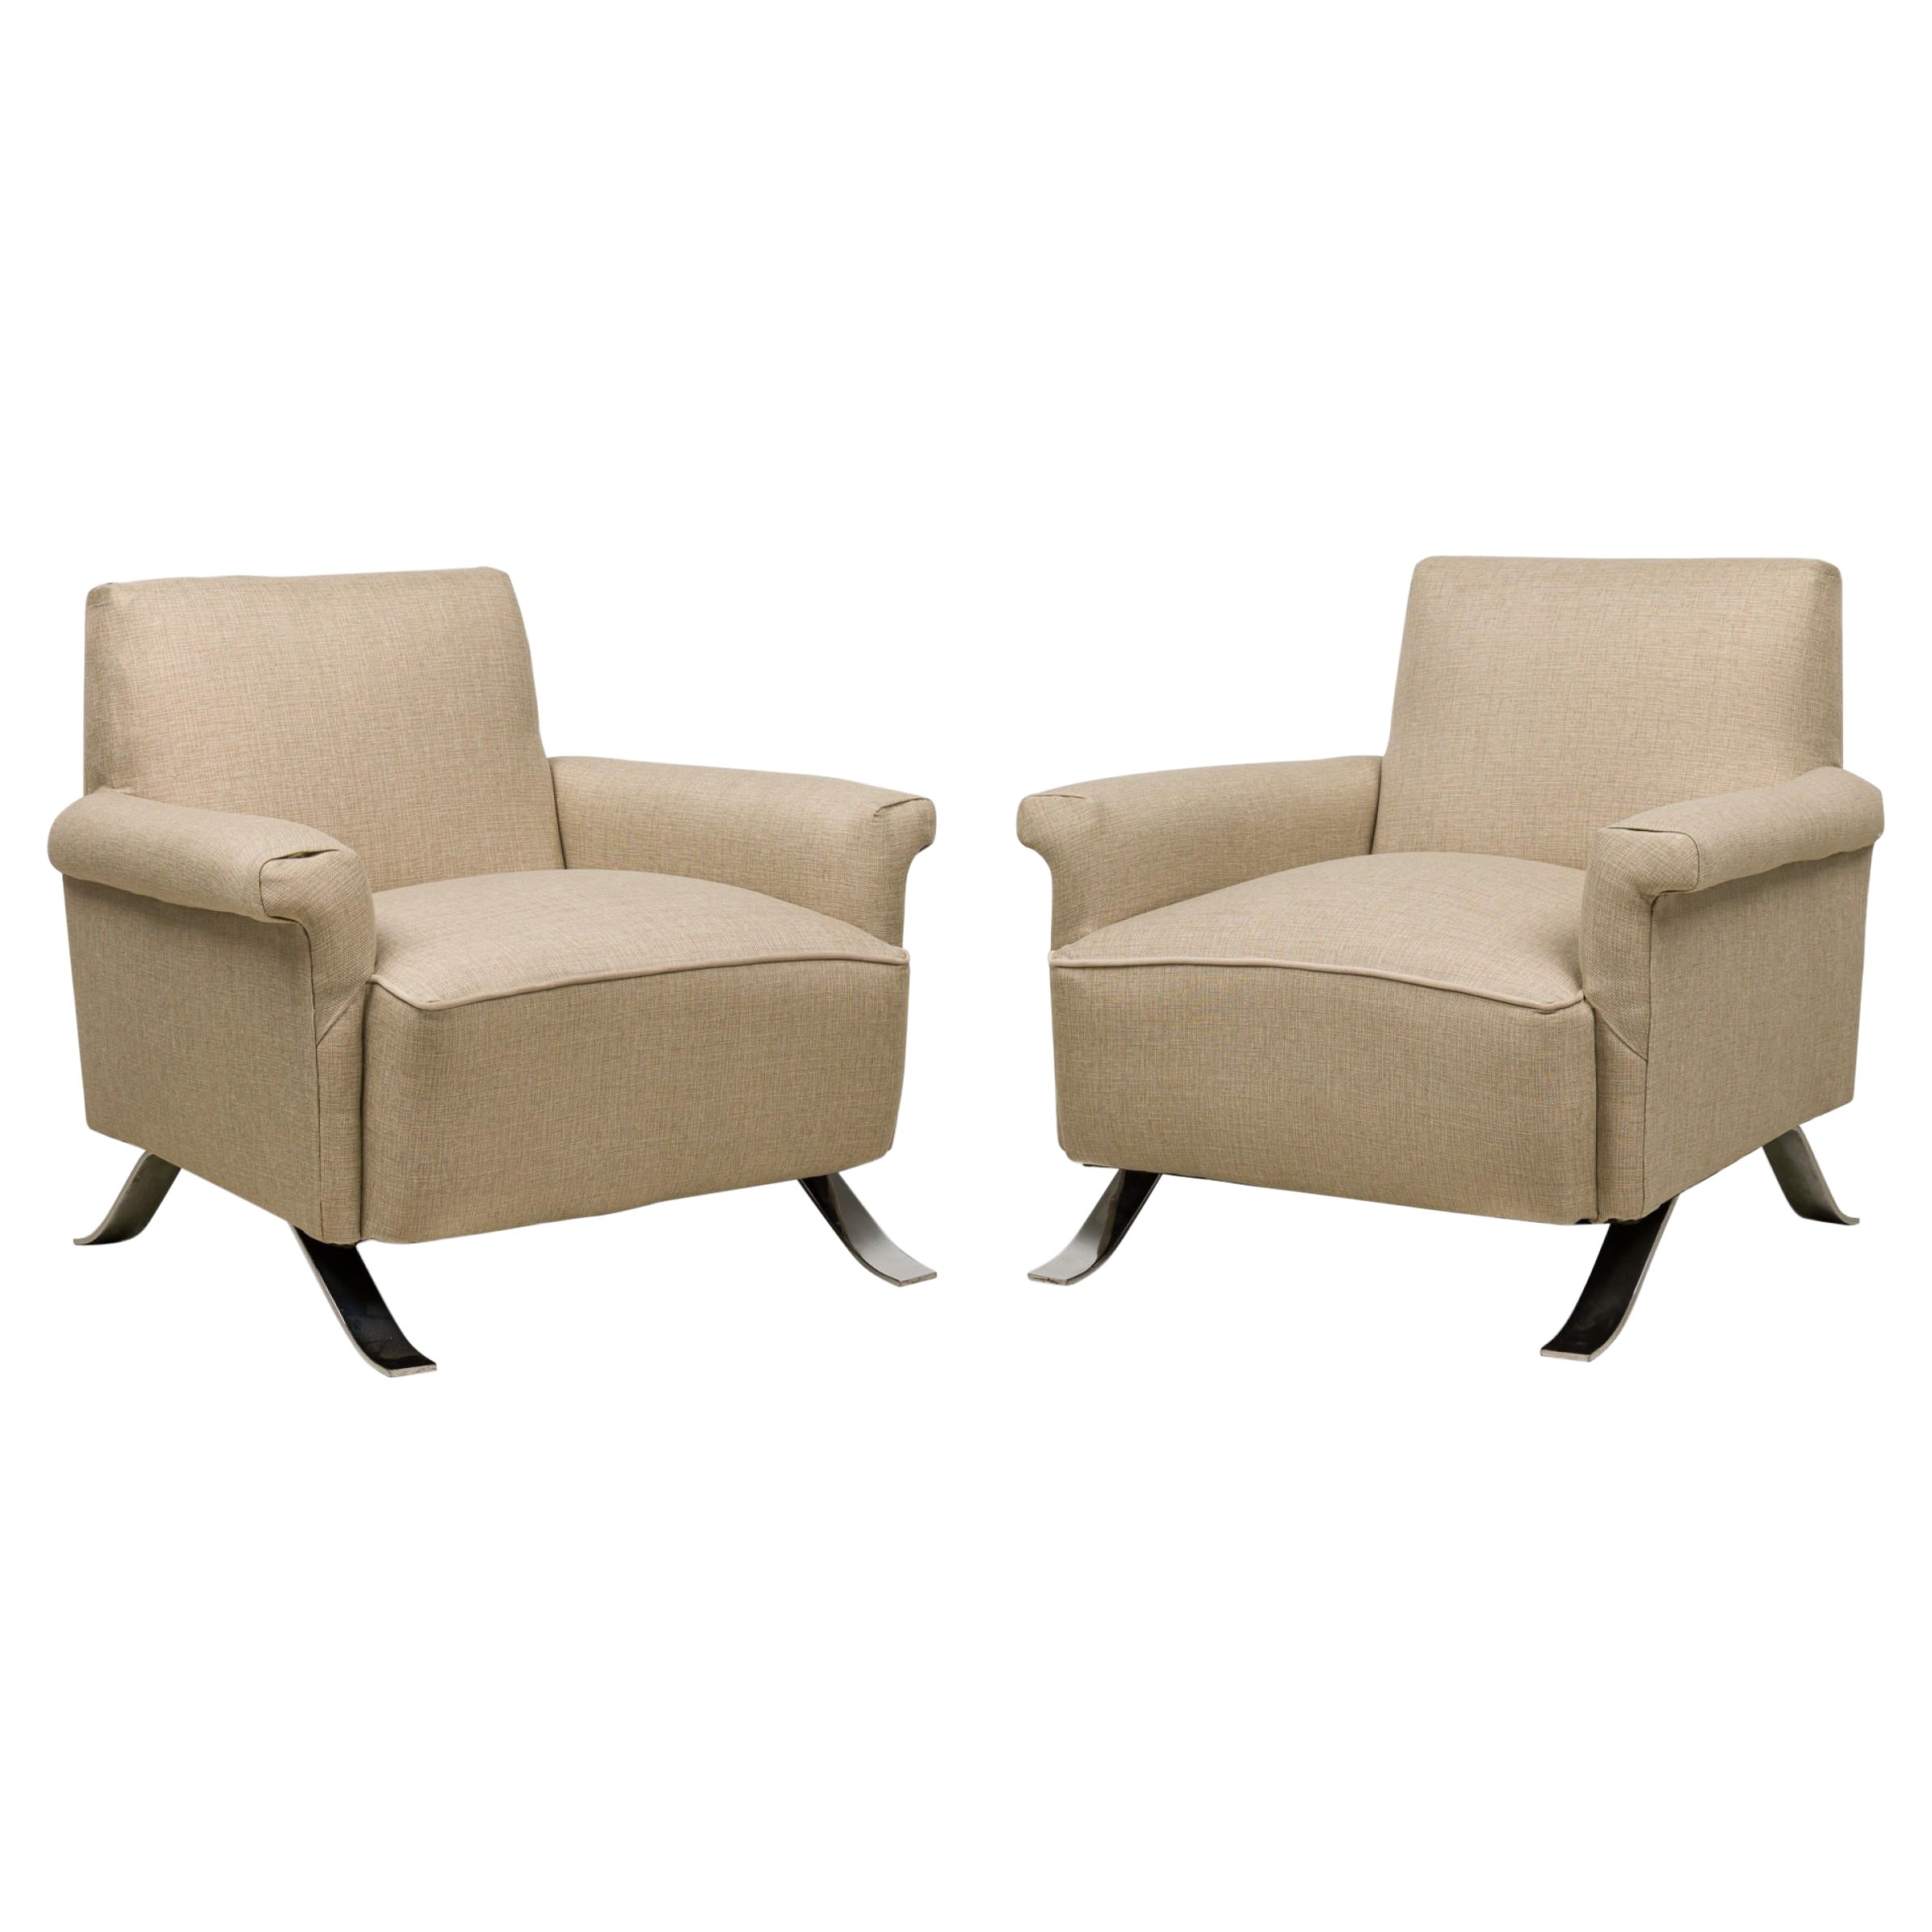 Pair of Mid-Century American Chrome Beige Fabric Upholstered Lounge / Armchairs For Sale